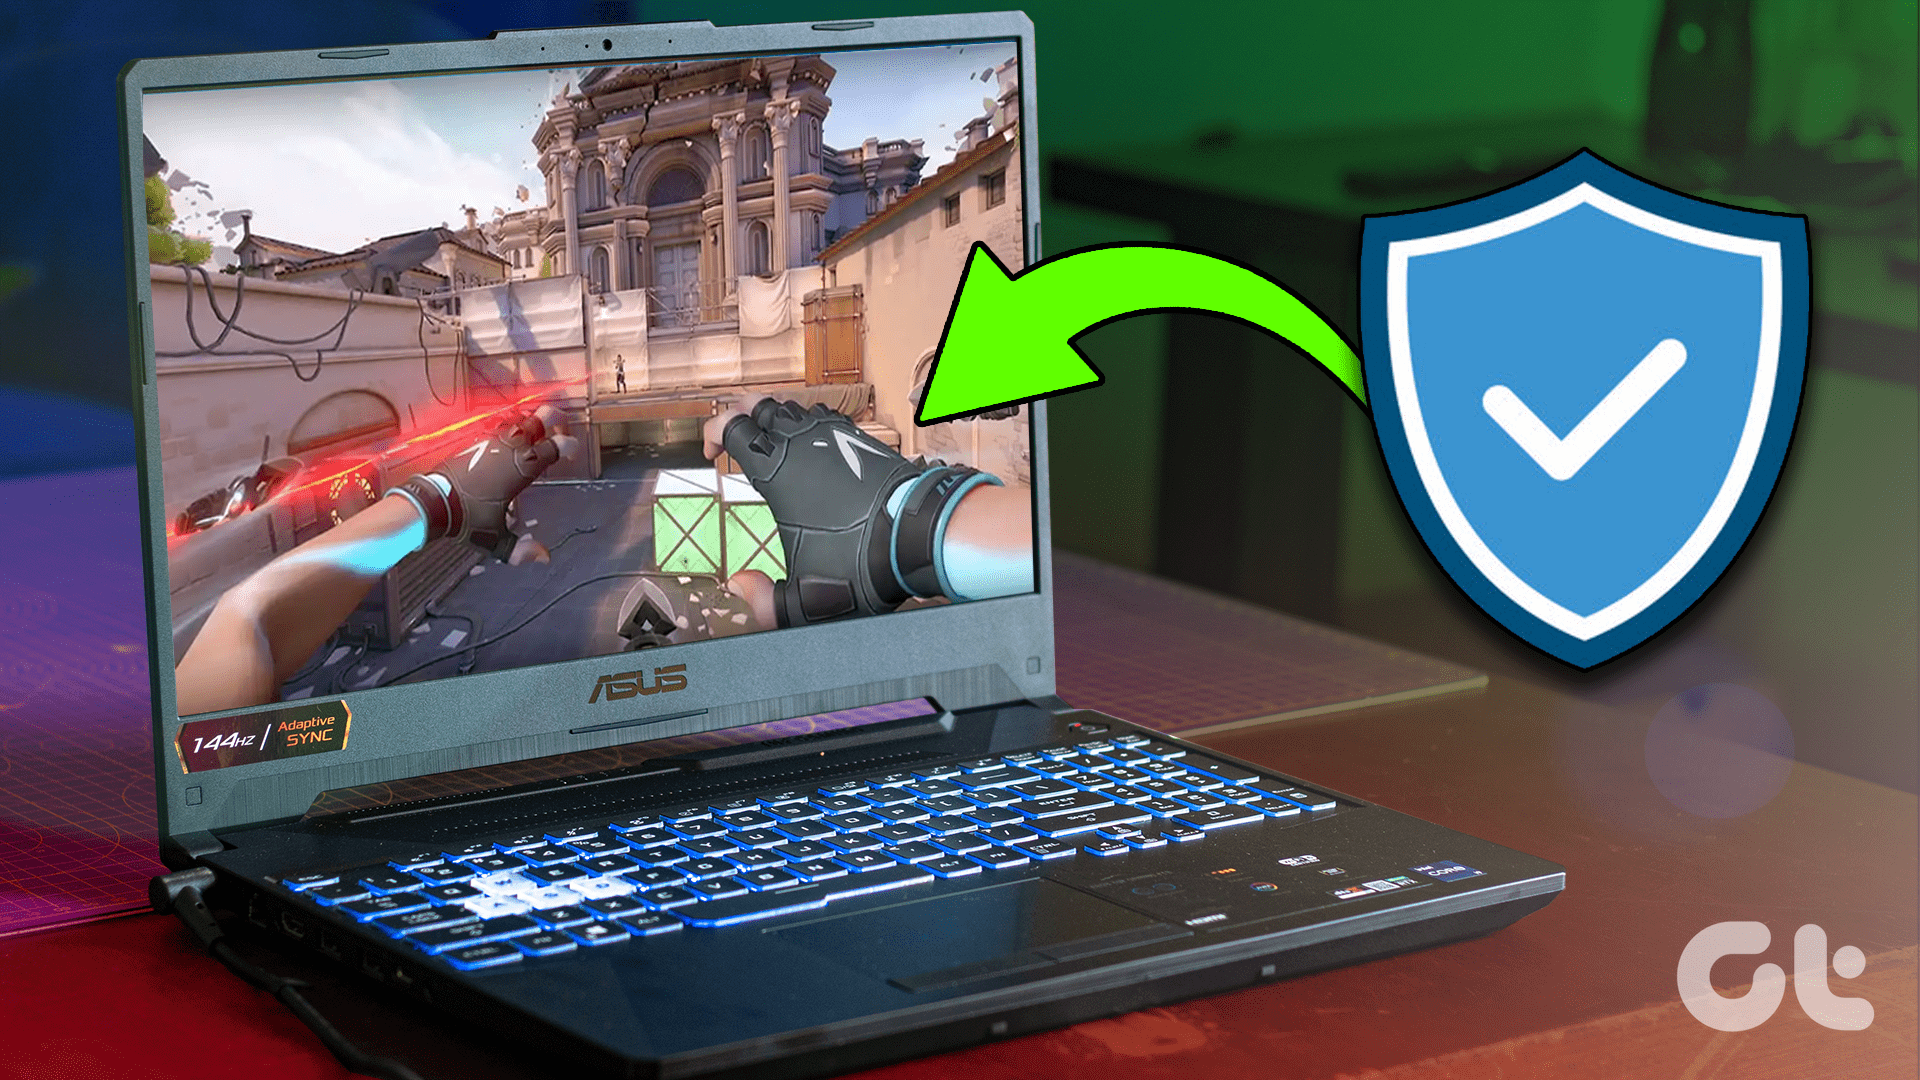 Featured Should You Have Antivirus in Your Gaming Laptop or PC